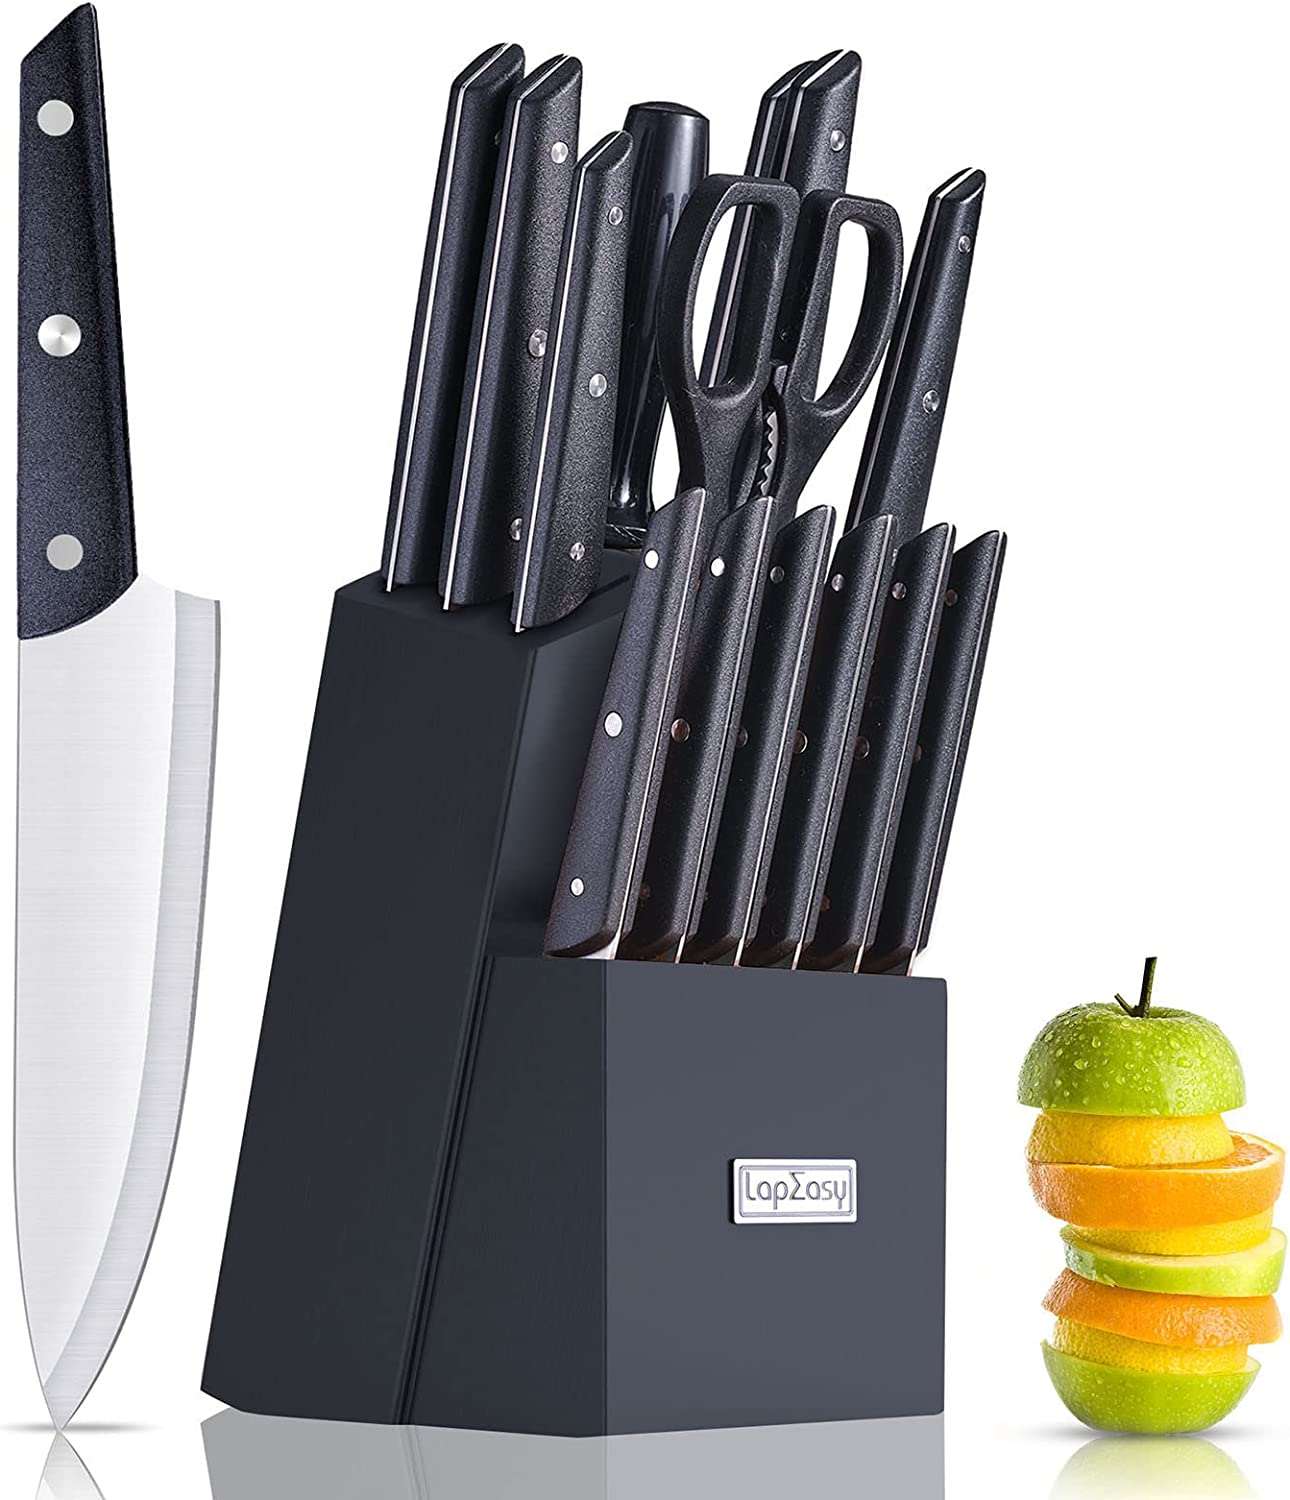 15-Piece LapEasy Knife Set with Pine Block Holder